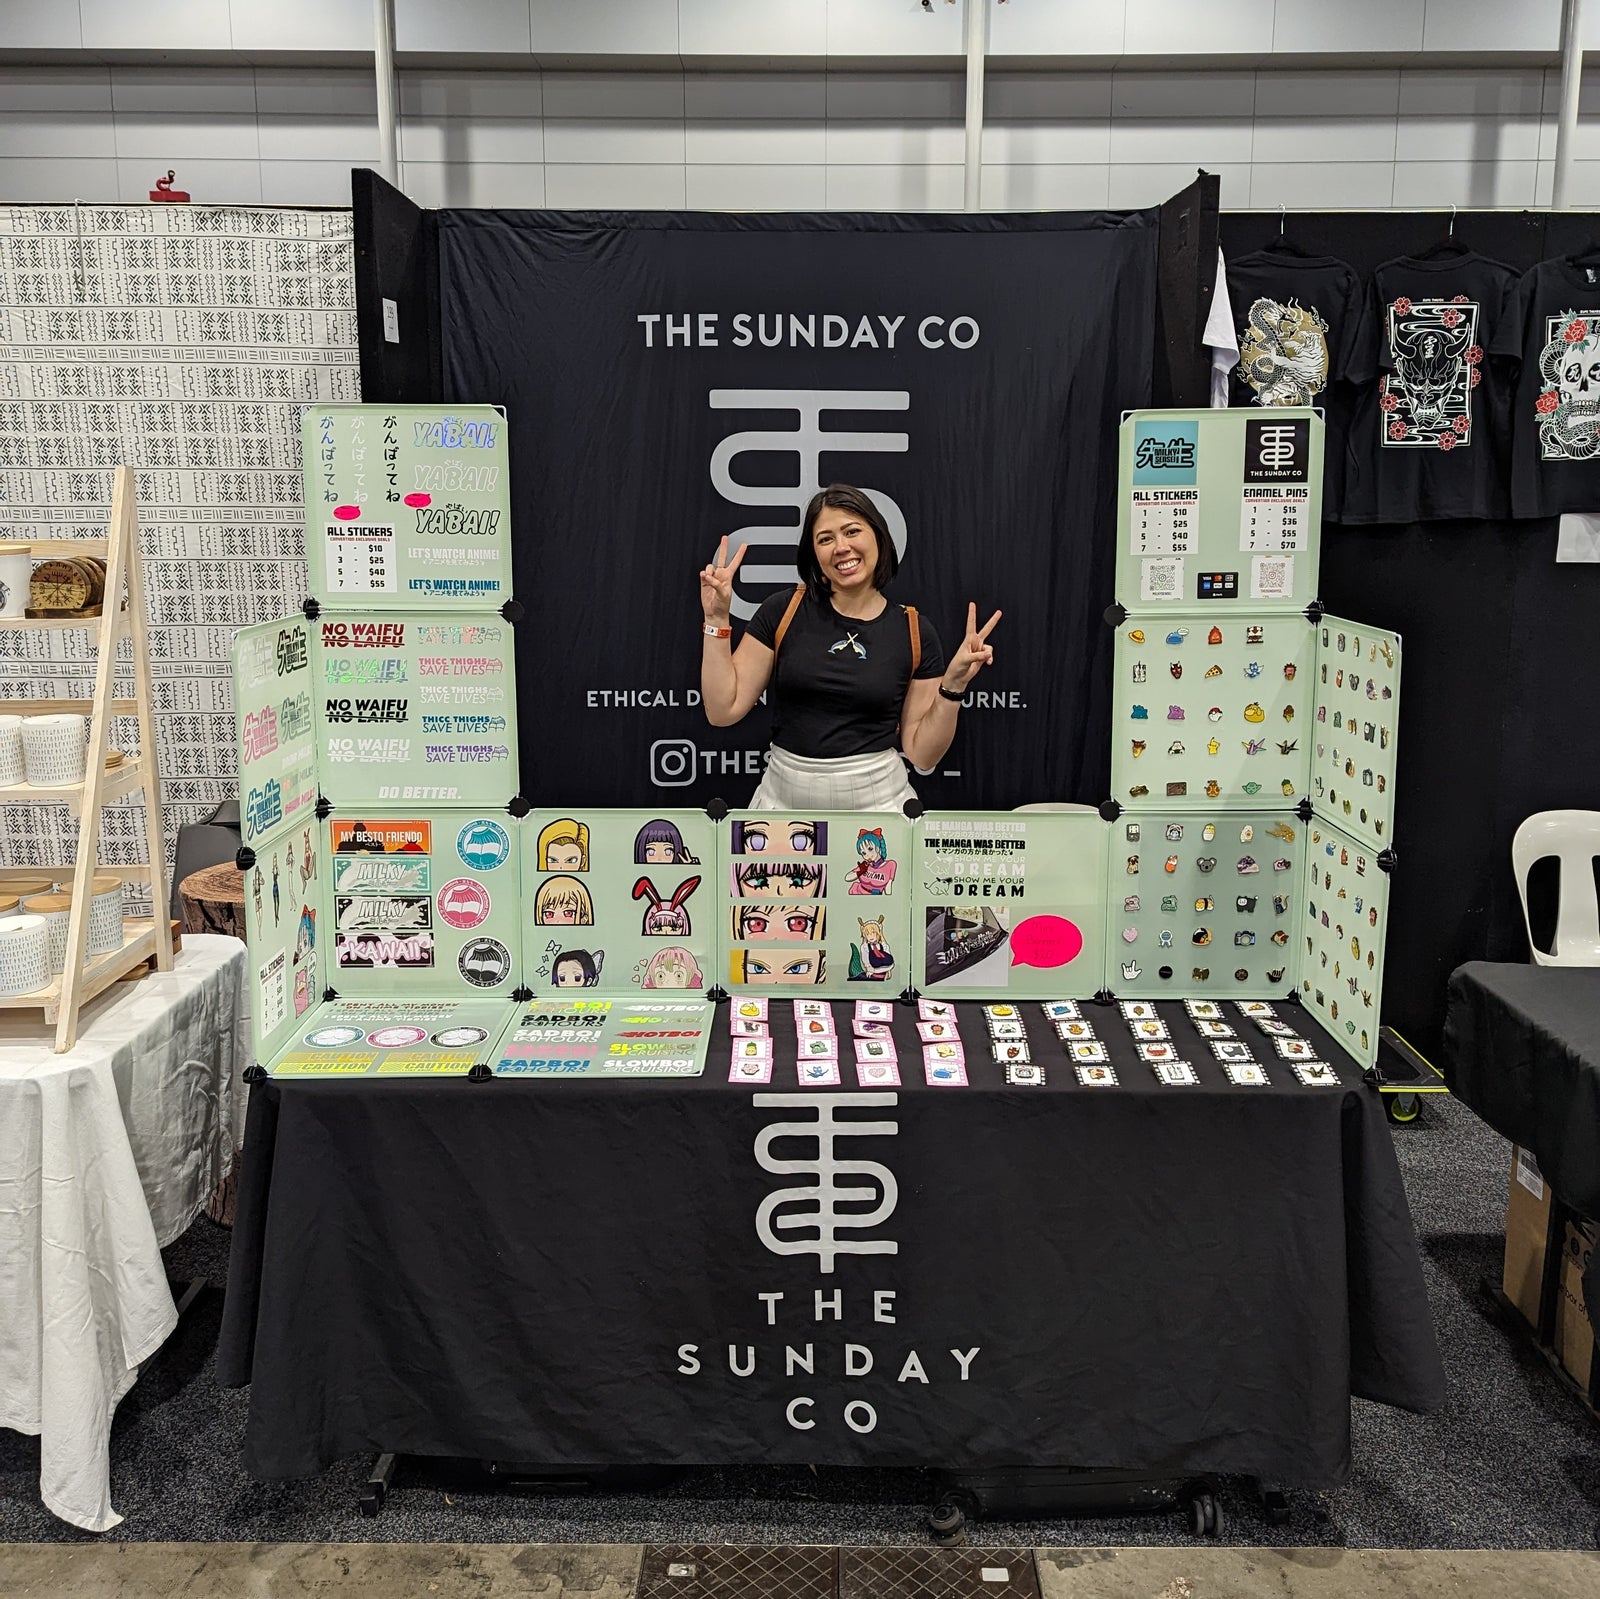 What's it like Exhibiting in Artist Alley - Australia?